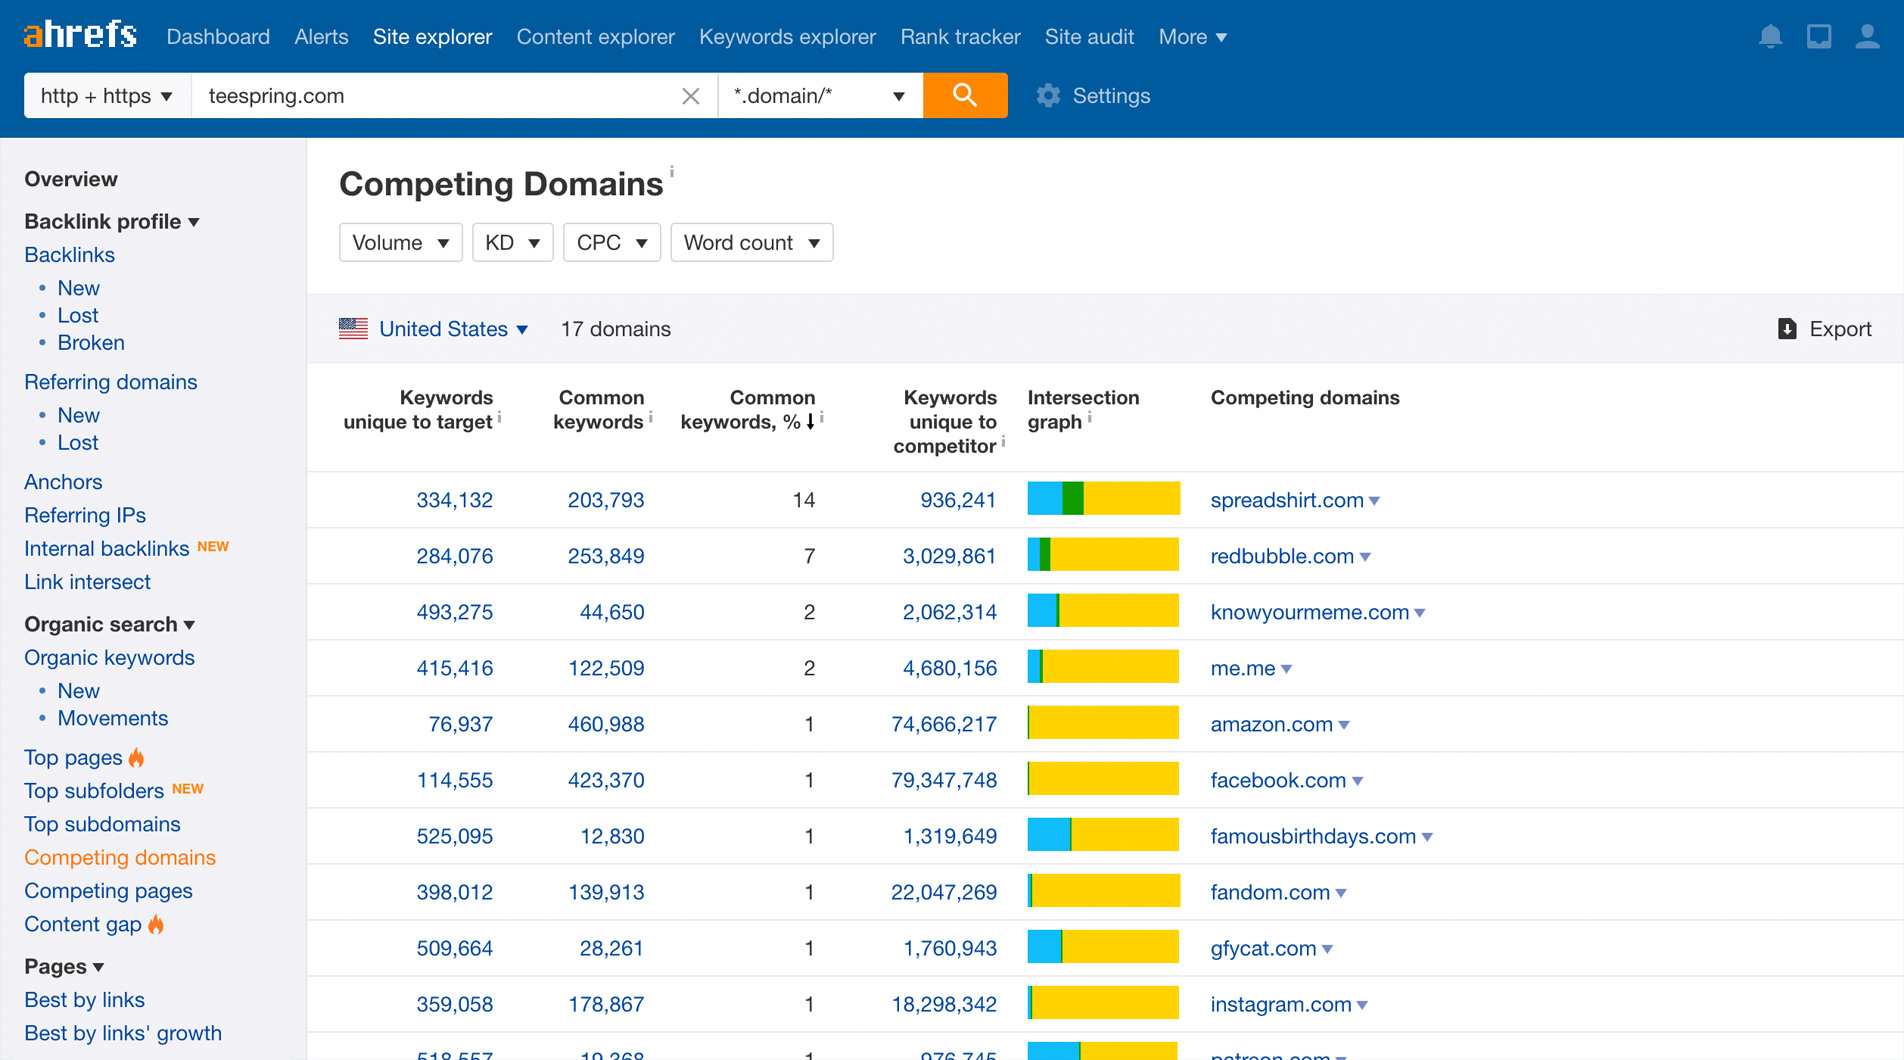 Ahrefs Competing Domains